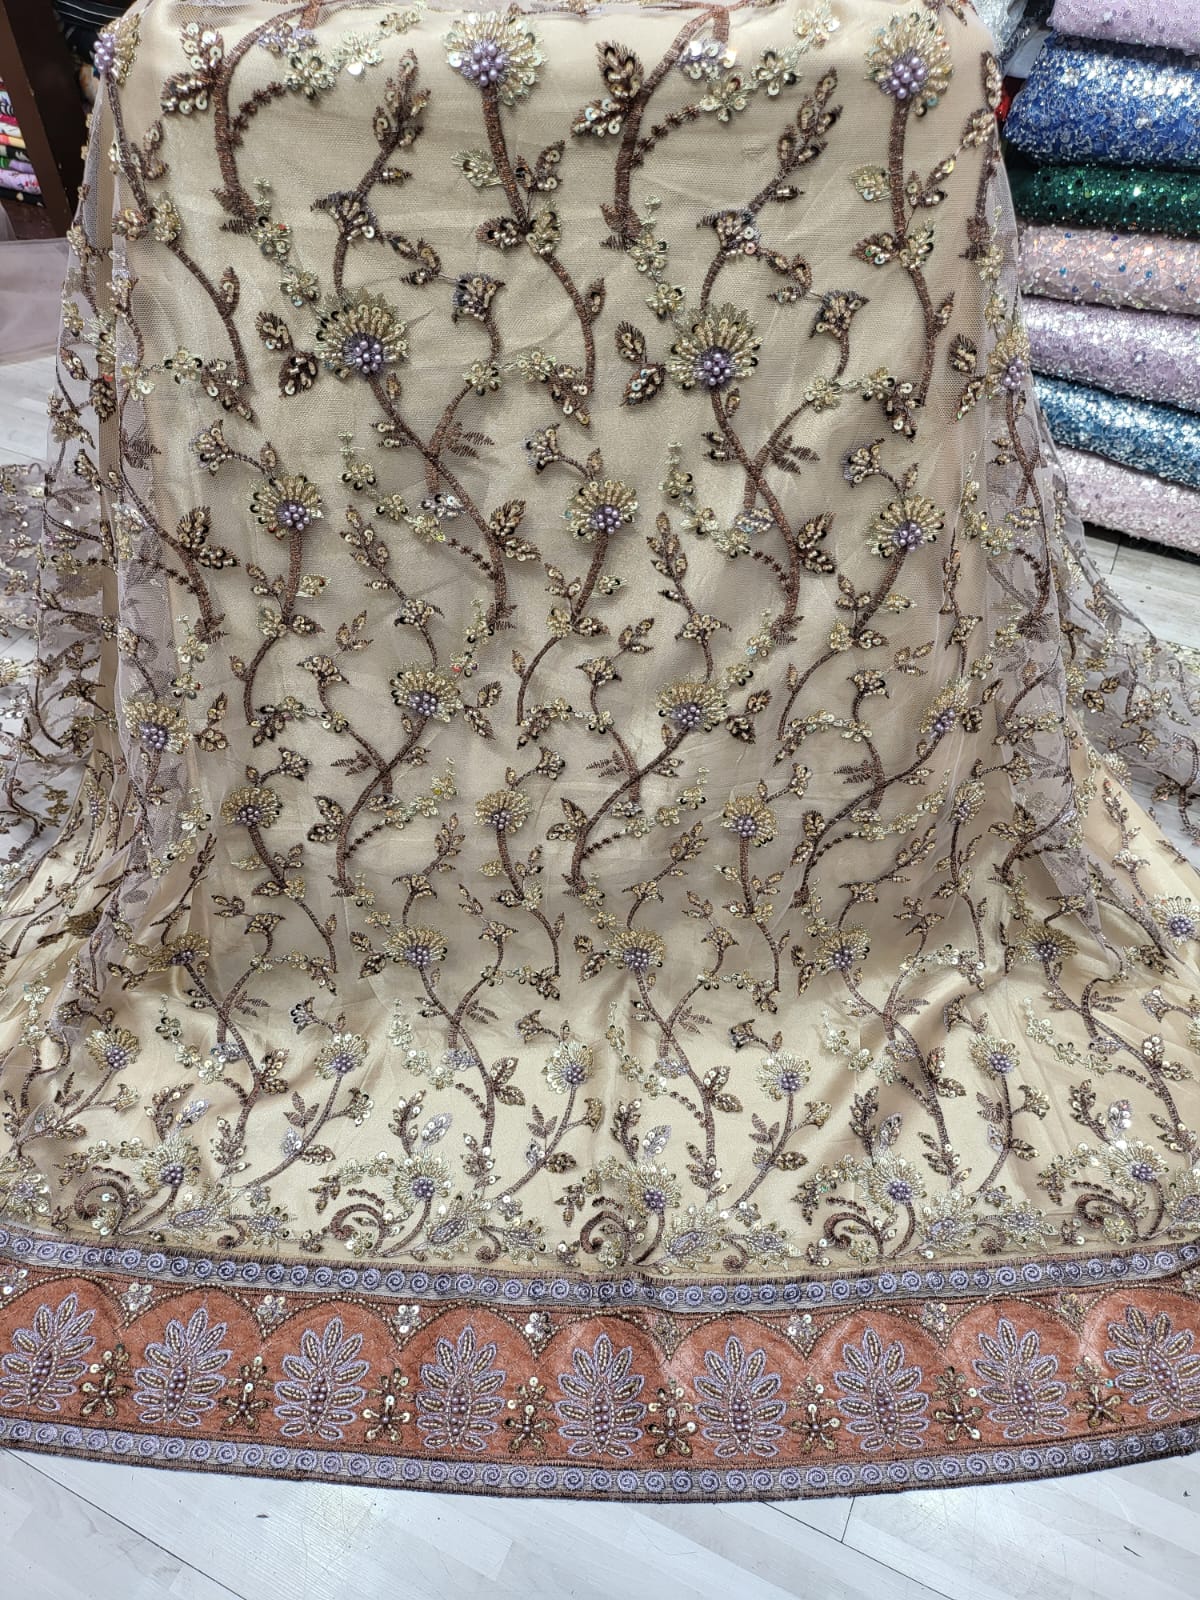 Imported Net Heavy Handwork Cutdana, Moti, Sequence work with Heavy Velvet lace daman